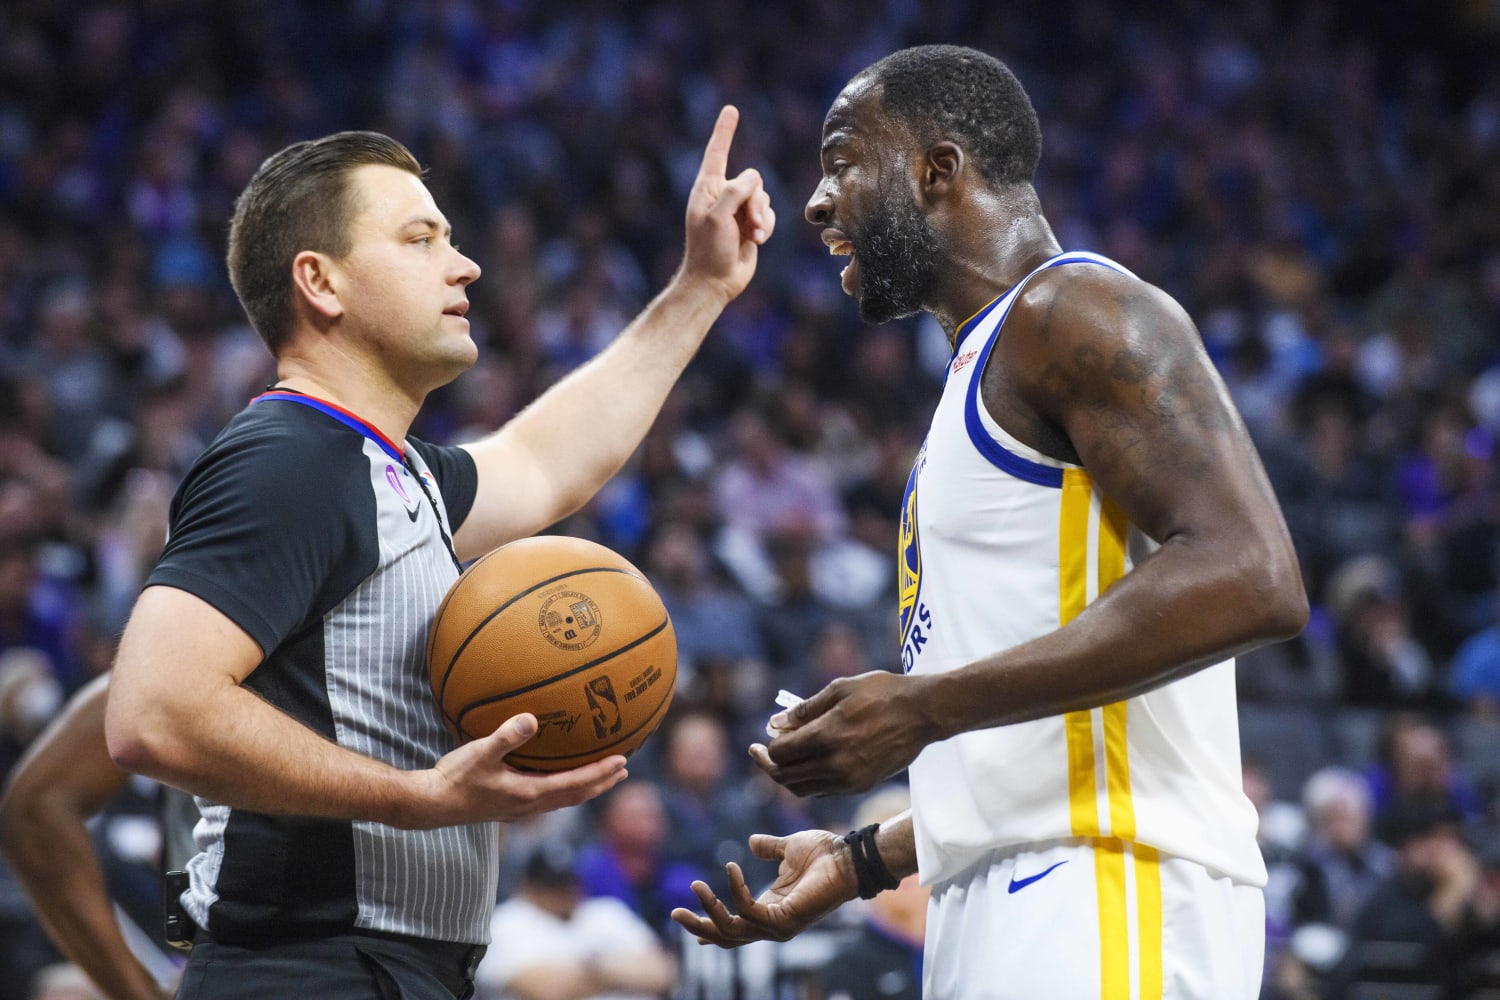 Draymond Green ejected from playoff game after appearing to stomp on Domantas Sabonis chest